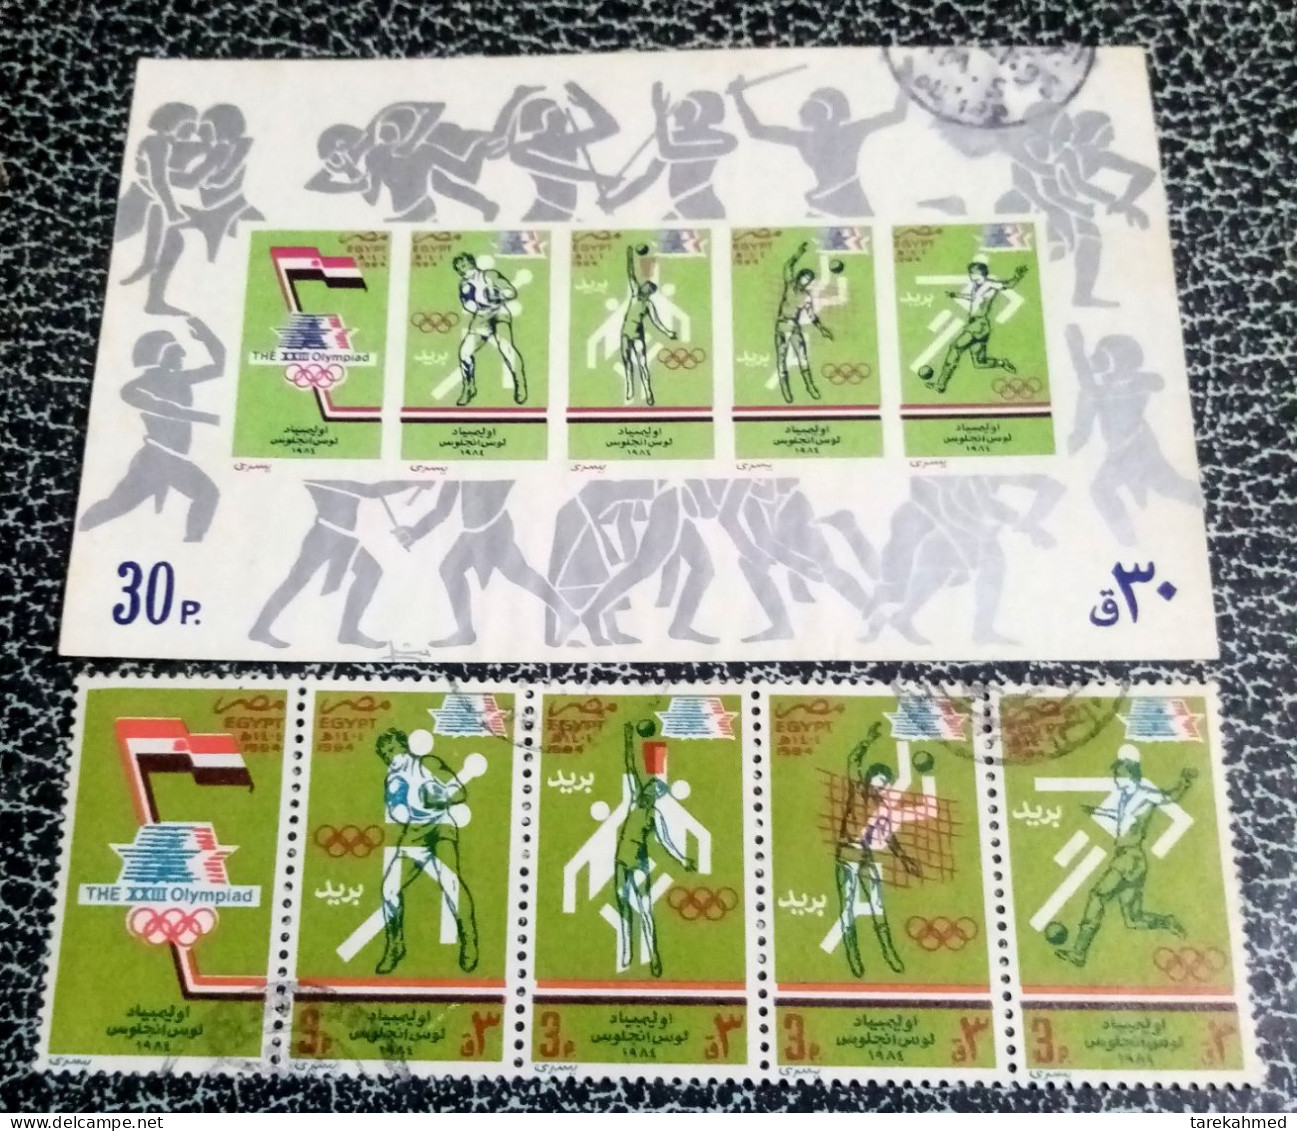 EGYPT -Complete Set Of The Olympic Games 1984-Los Angeles Olympics With The Souvenir Sheet, VF - Used Stamps